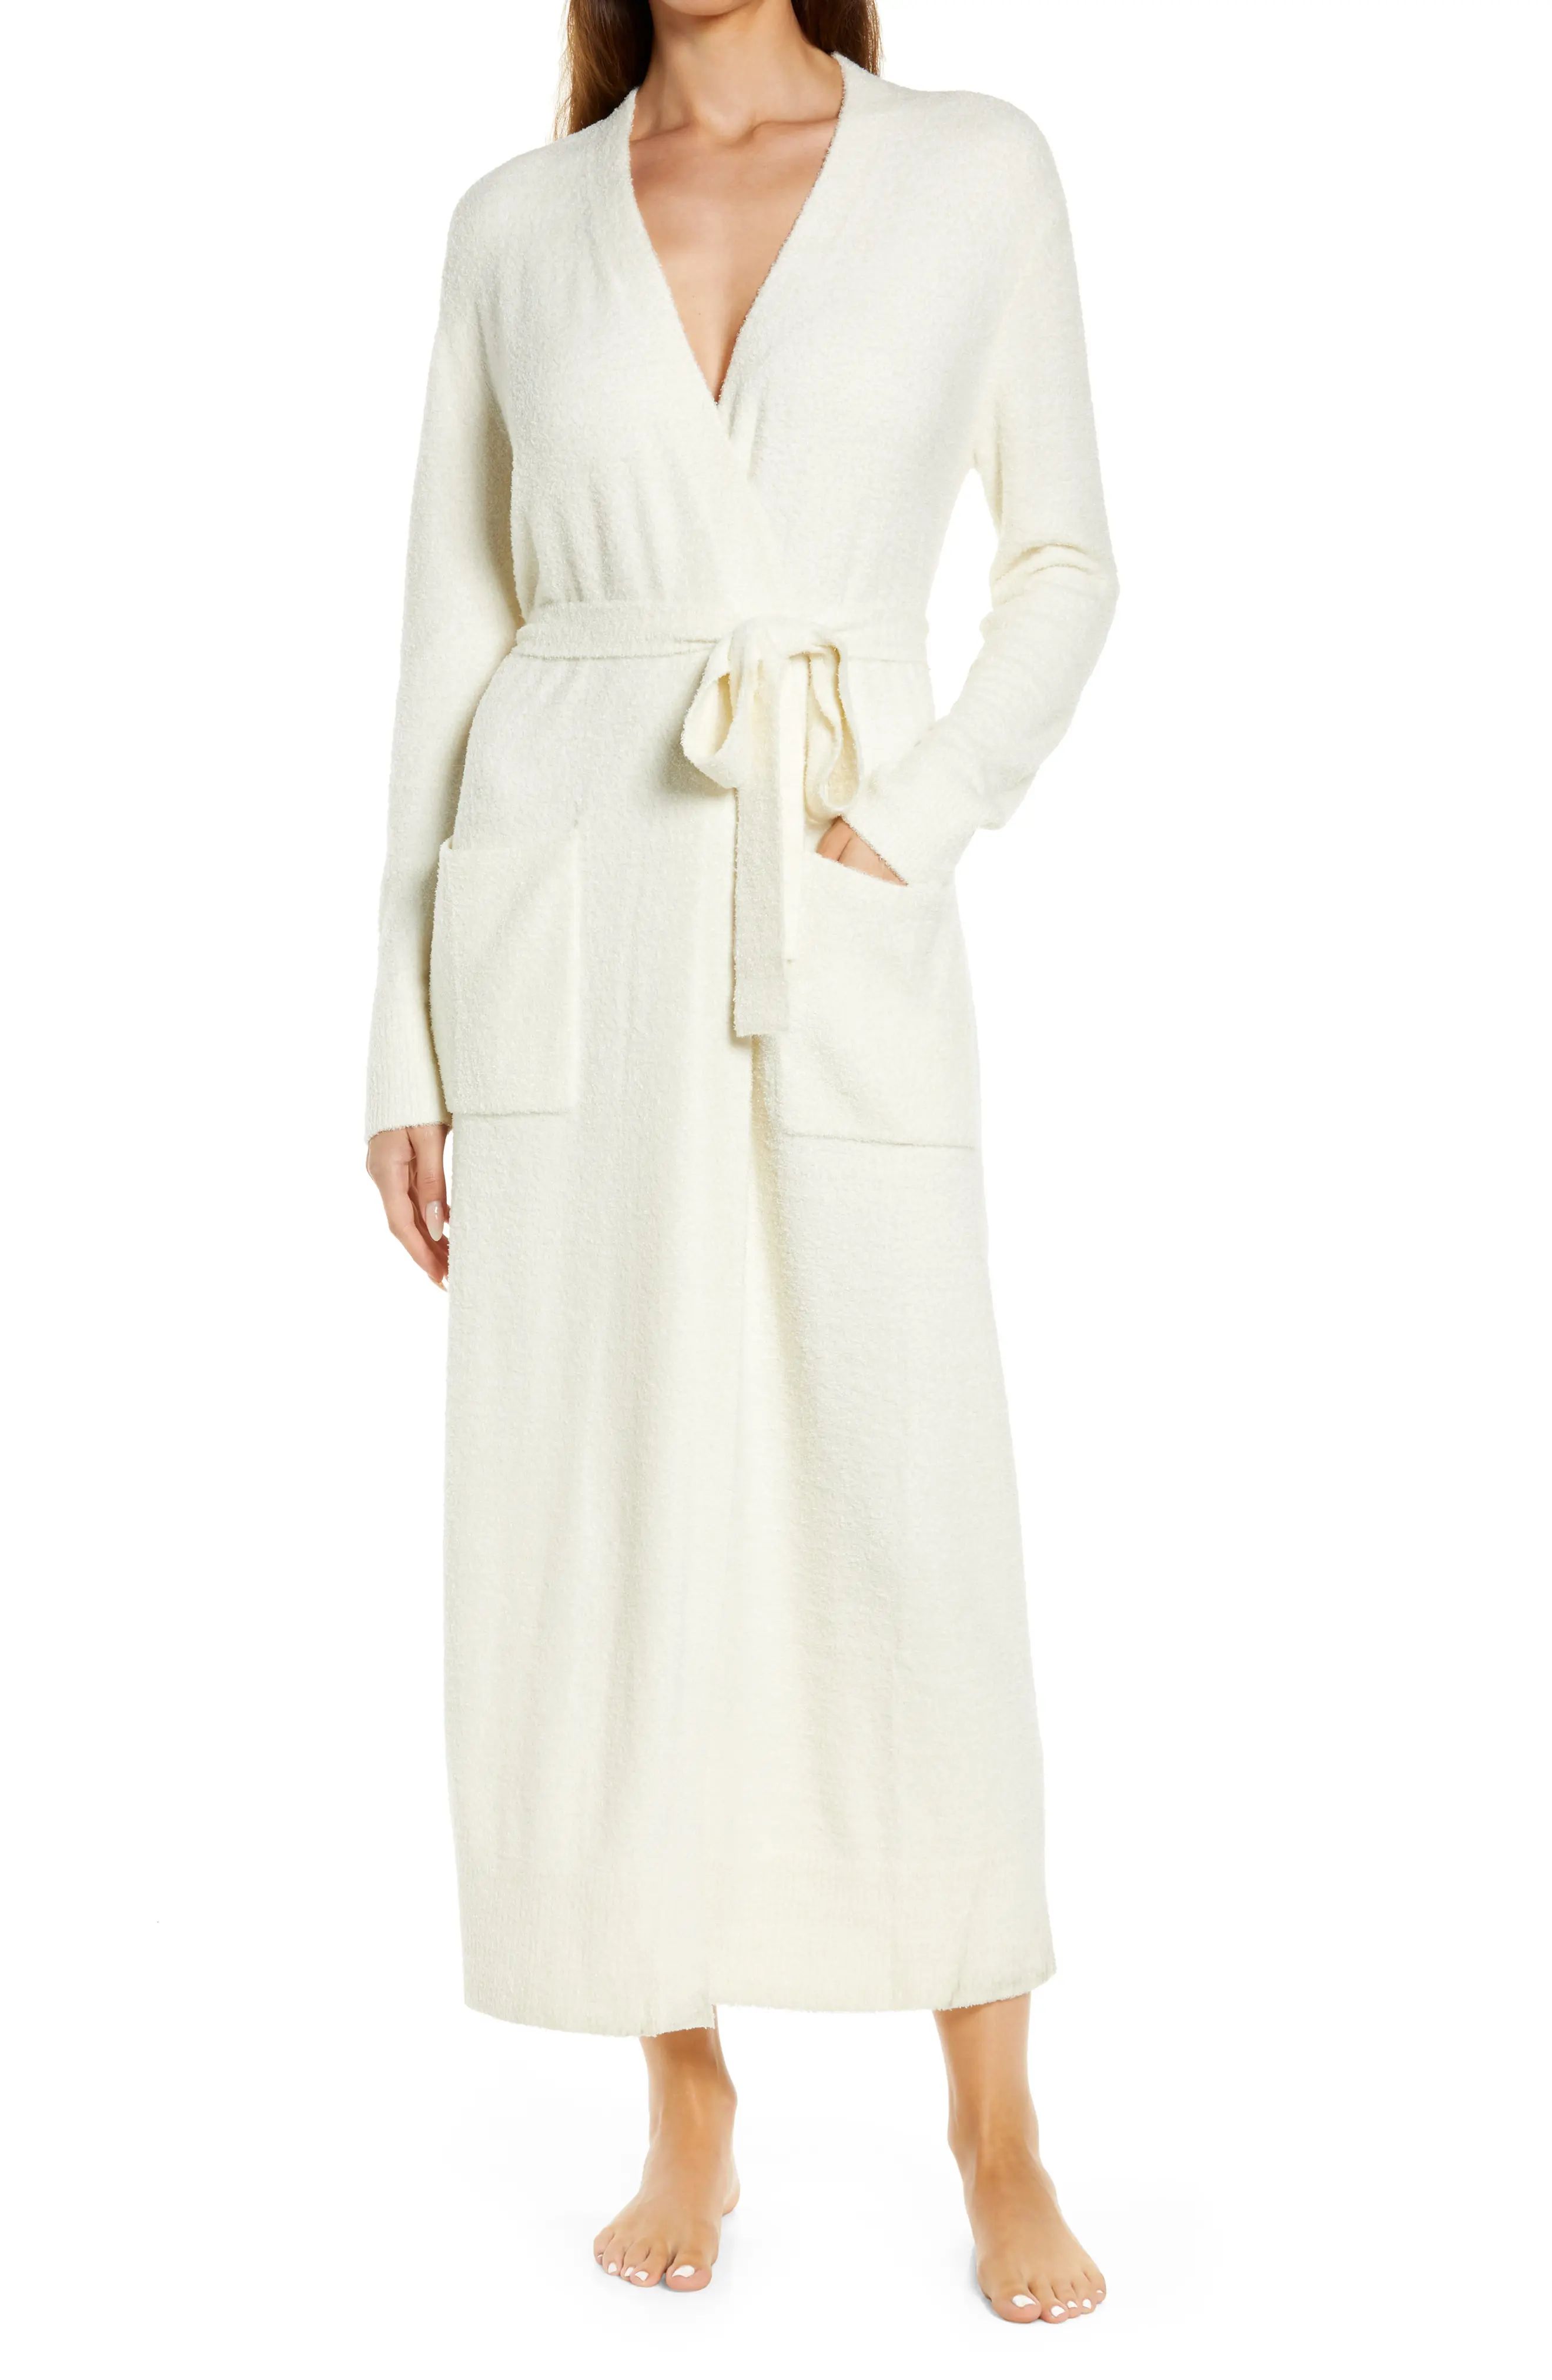 Barefoot Dreams(R) CozyChic Ultra Lite(TM) Long Robe, Size Xx-Small in Cream at Nordstrom | Nordstrom